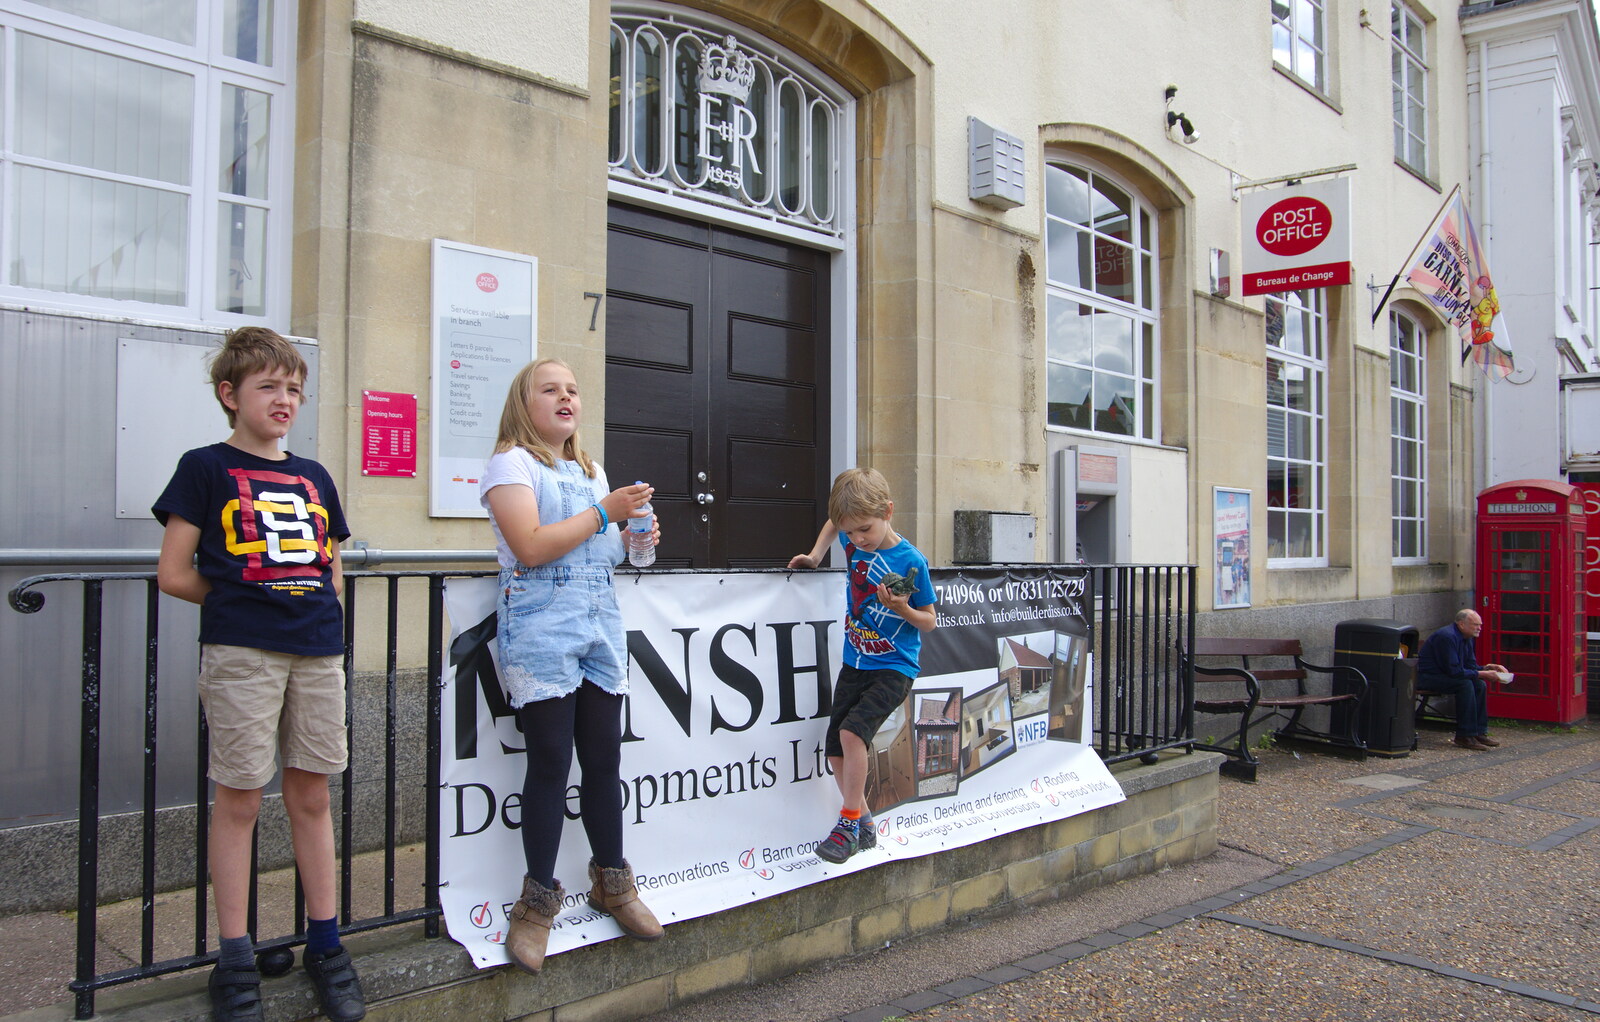 Fred, Alice and Harry outside the post office from The Diss Carnival 2019, Diss, Norfolk - 9th June 2019